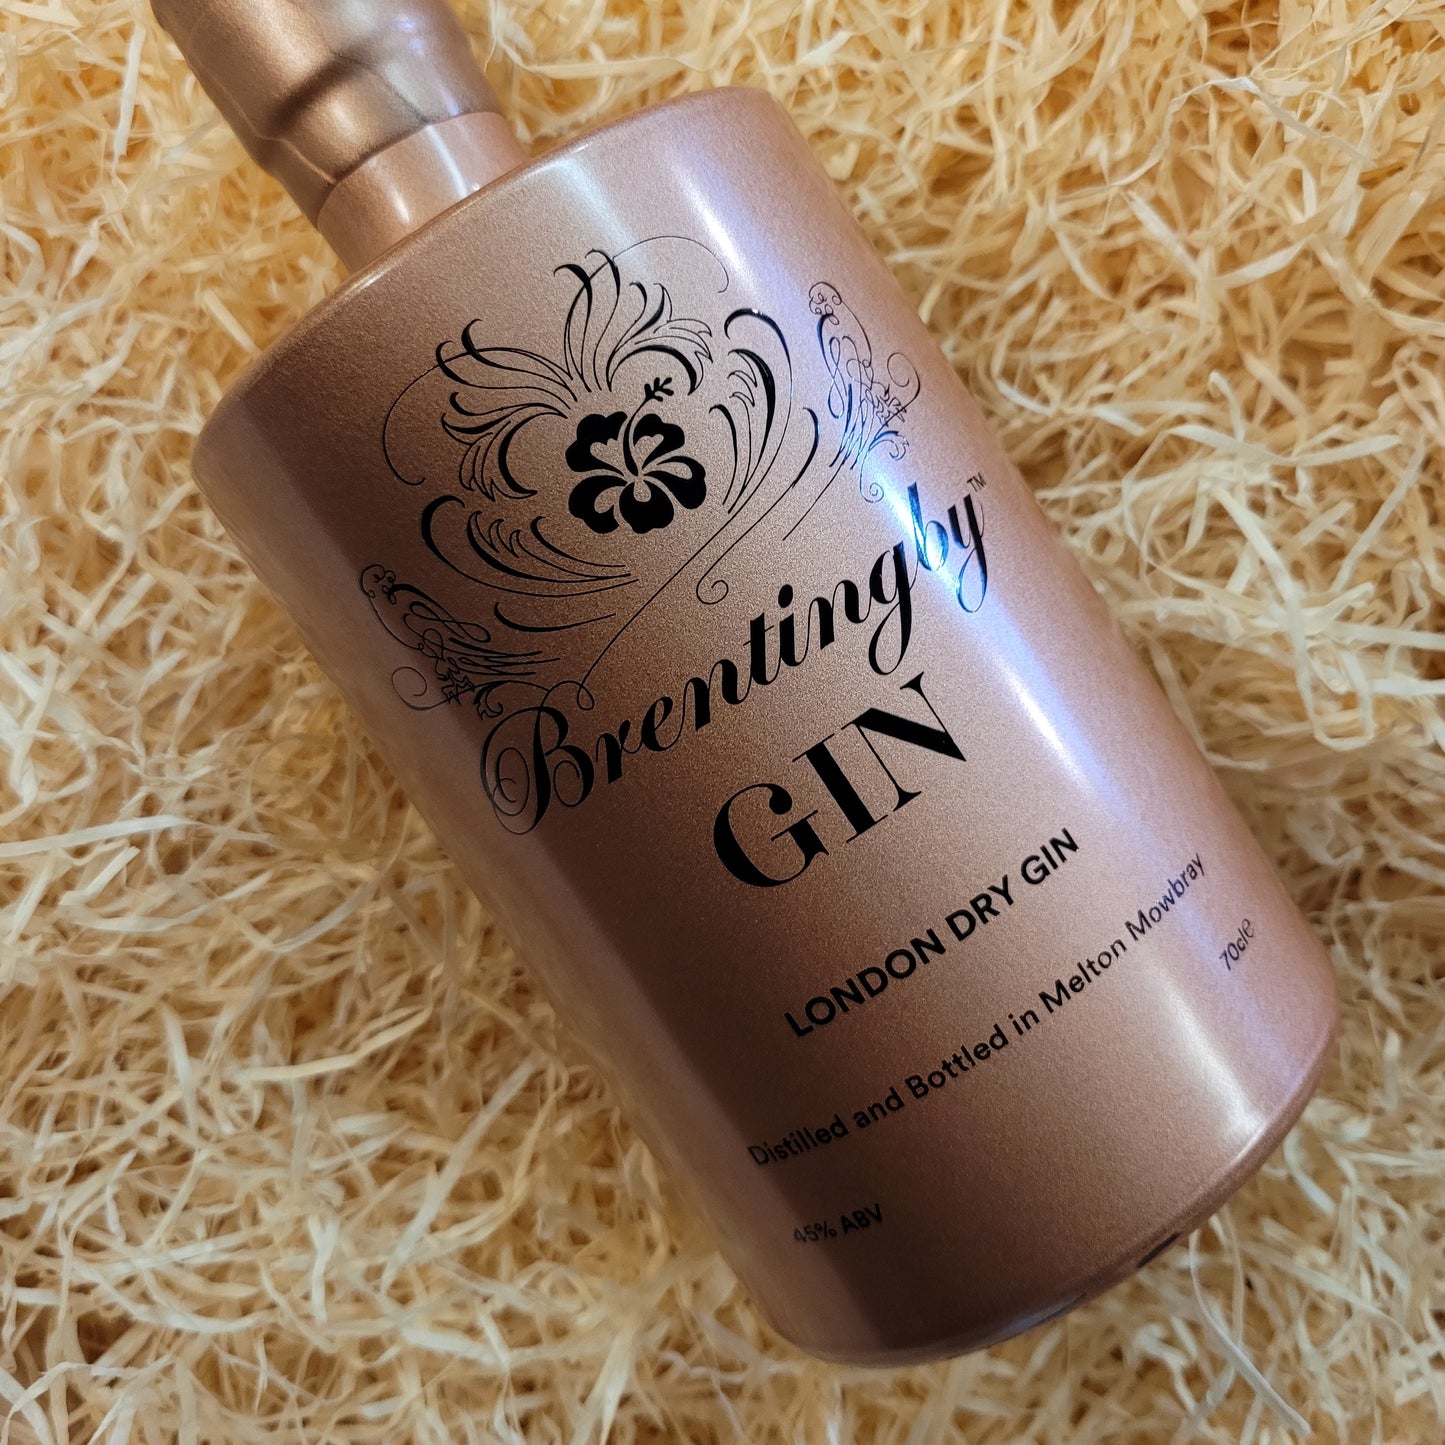 Brentingby London Dry Gin (70cl)